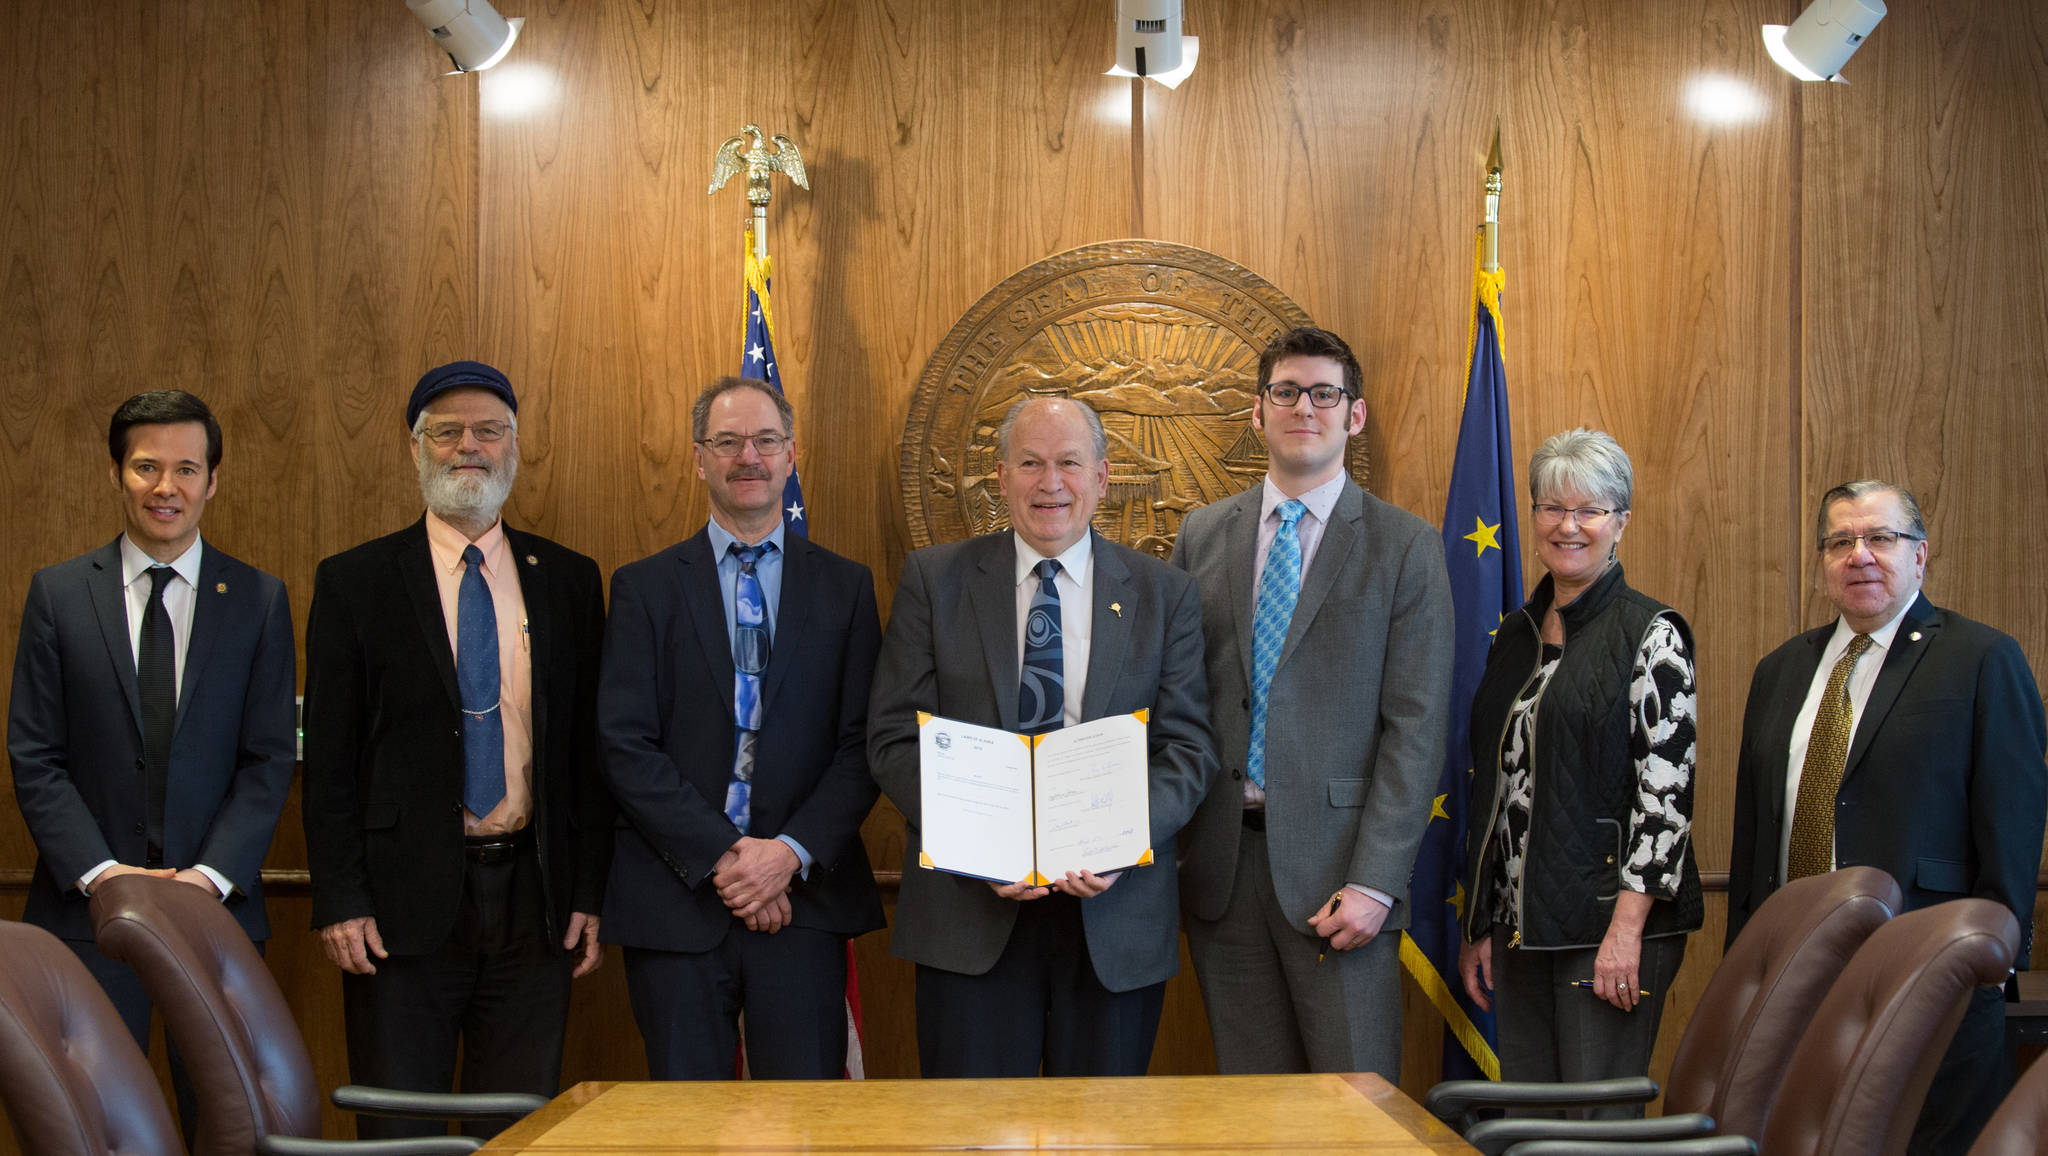 From left to right, Rep. Neal Foster, D-Nome; Rep. Paul Seaton, R-Homer; David Teal of the Legislative Finance Division; Gov. Bill Walker; Neil Steininger of the Office of Management and Budget; Sen. Anna MacKinnon, R-Eagle River; and Sen. Lyman Hoffman, D-Bethel are seen at the signing ceremony for House Bill 321 on Tuesday, March 27, 2018 in the governor’s cabinet room of the Alaska State Capitol. (Drew Cason | Alaska House Majority)